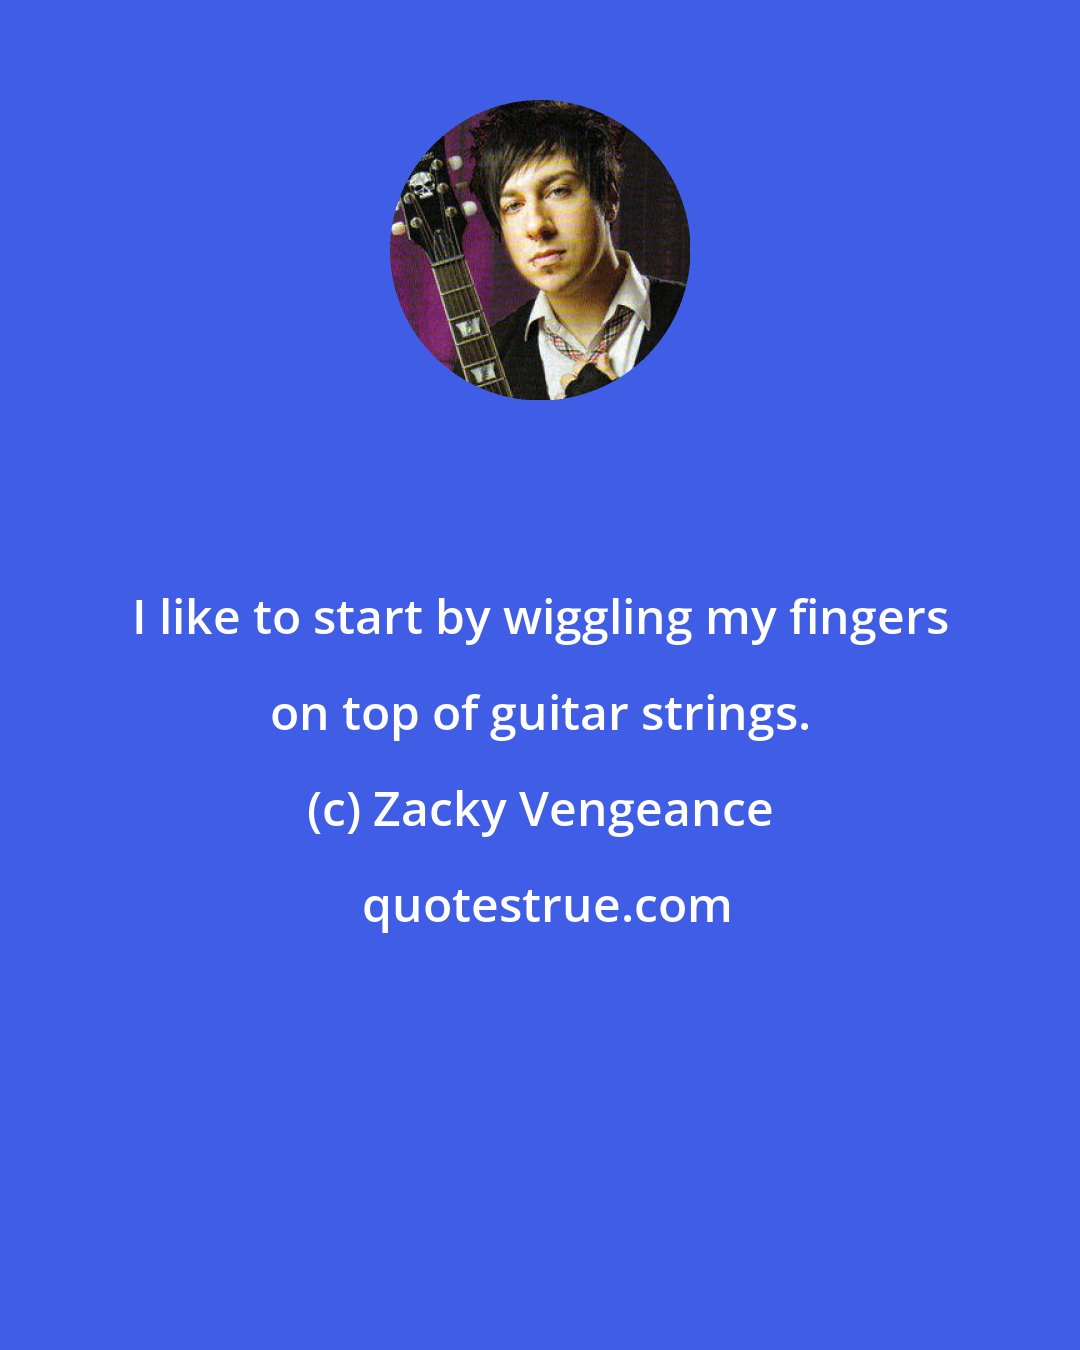 Zacky Vengeance: I like to start by wiggling my fingers on top of guitar strings.